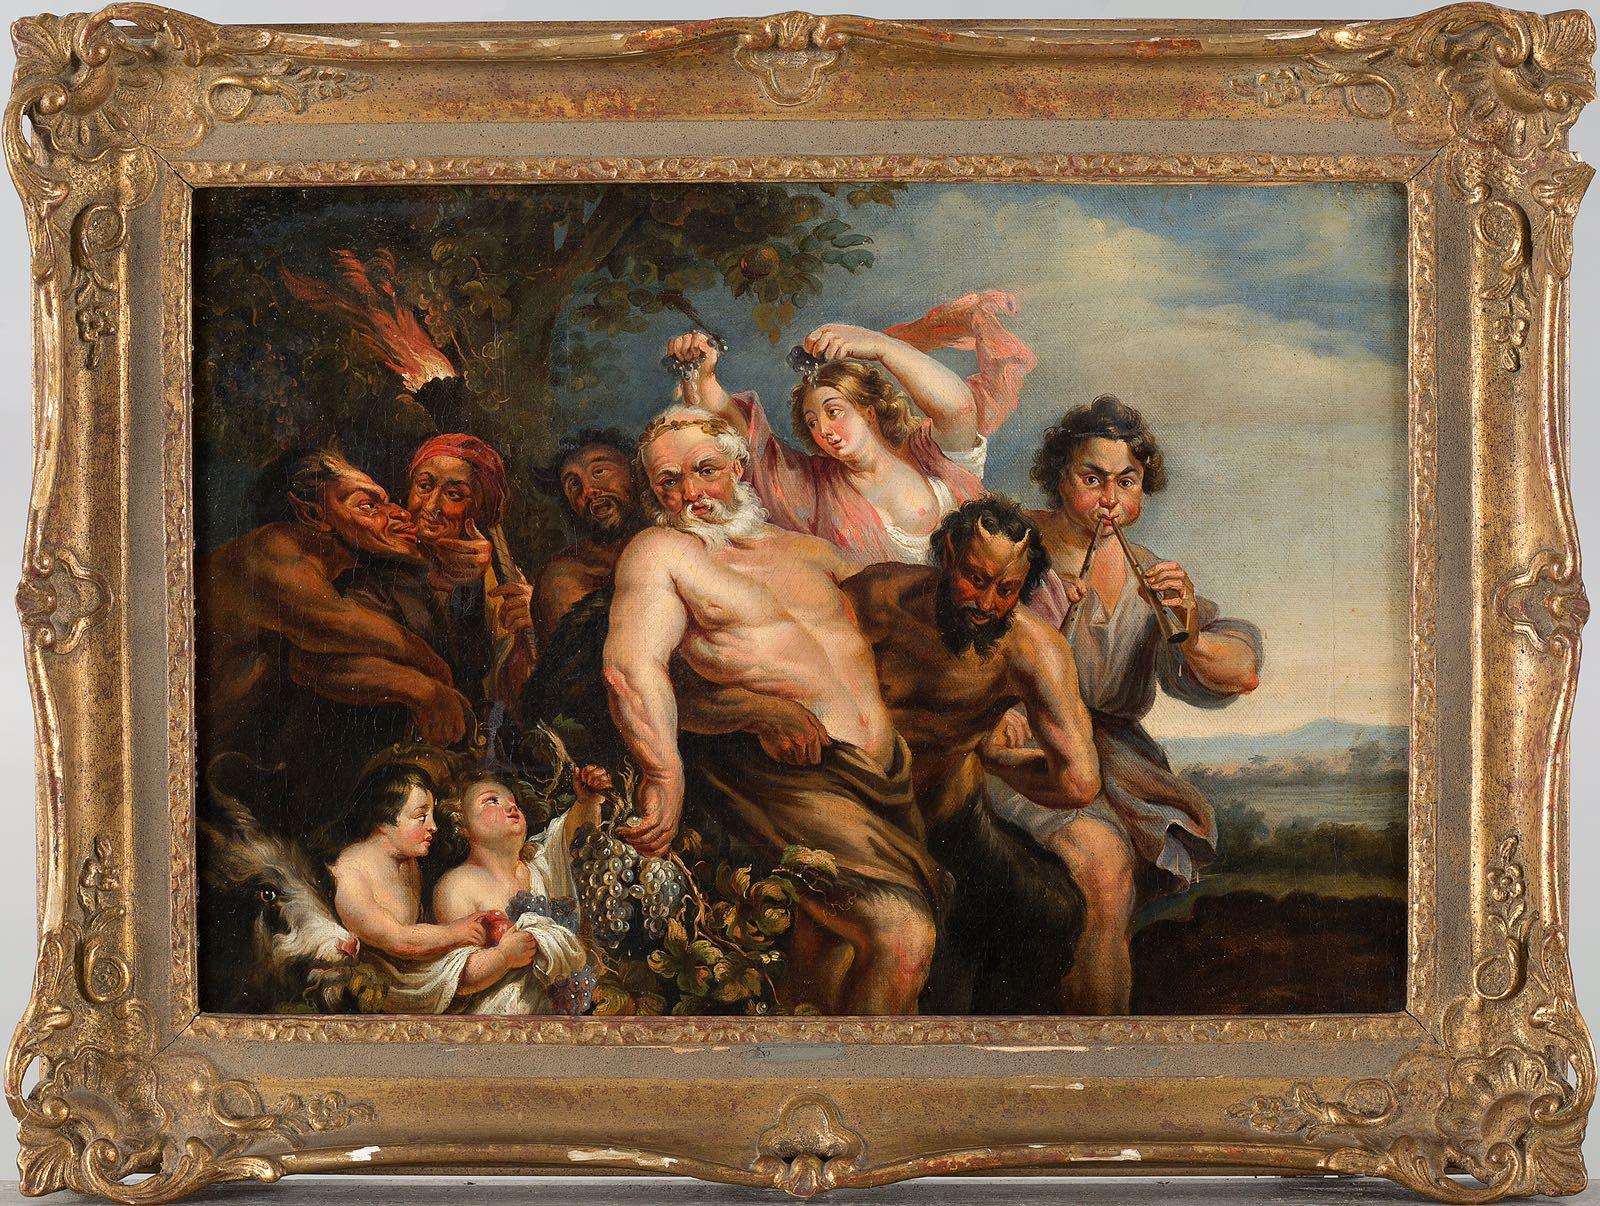 Unknown Figurative Painting - Carnival Scene - Oil Painting by North European Artist After Van Dyck 